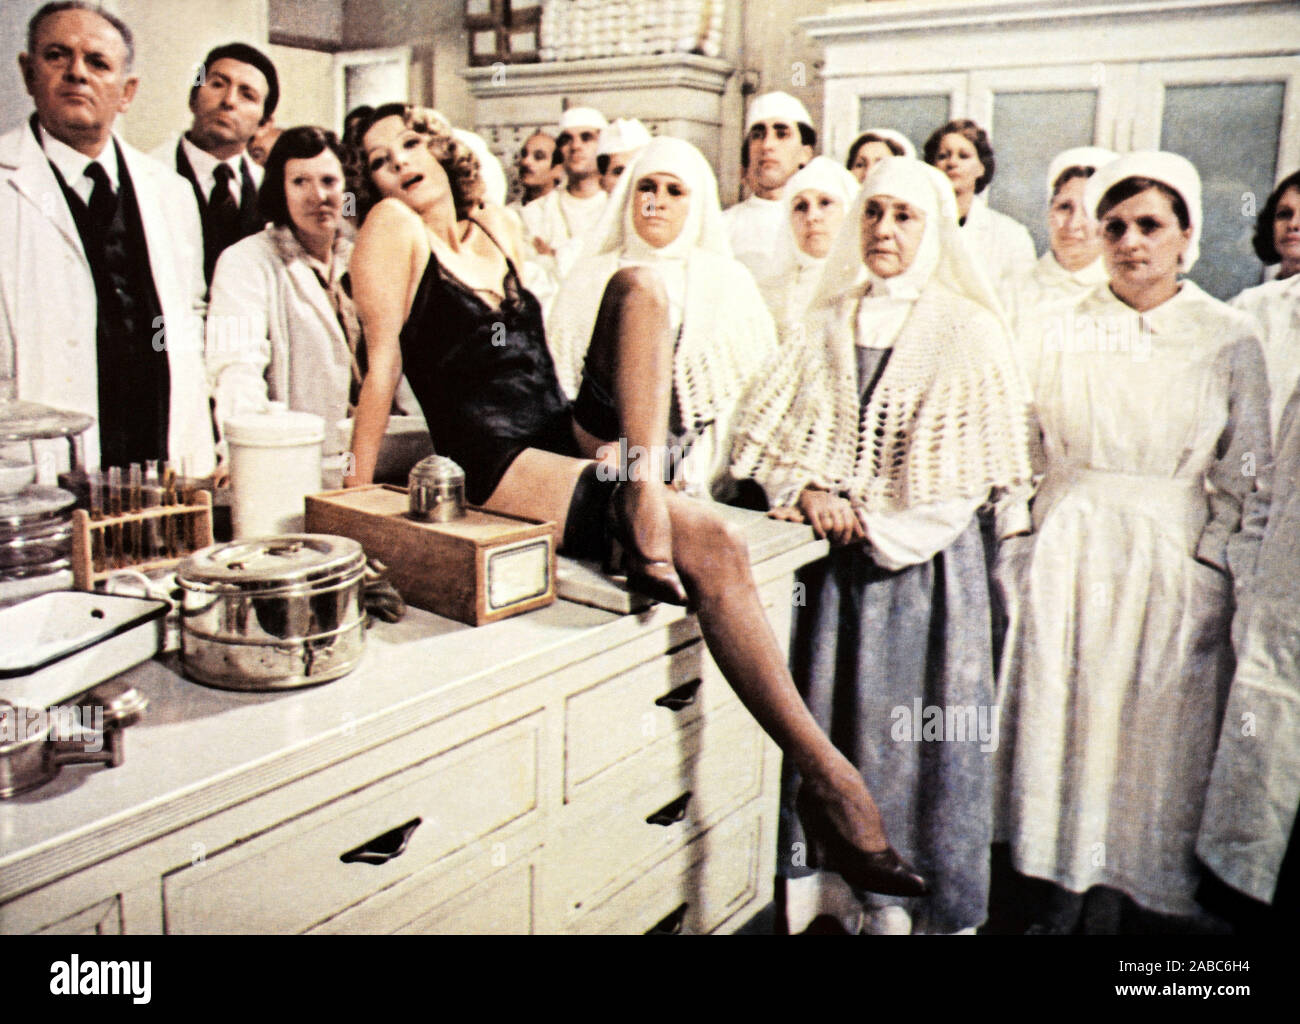 DOWN THE ANCIENT STAIRS, (aka PER LE ANTICHE SCALE), Barbara Bouchet, 1975  Stock Photo - Alamy